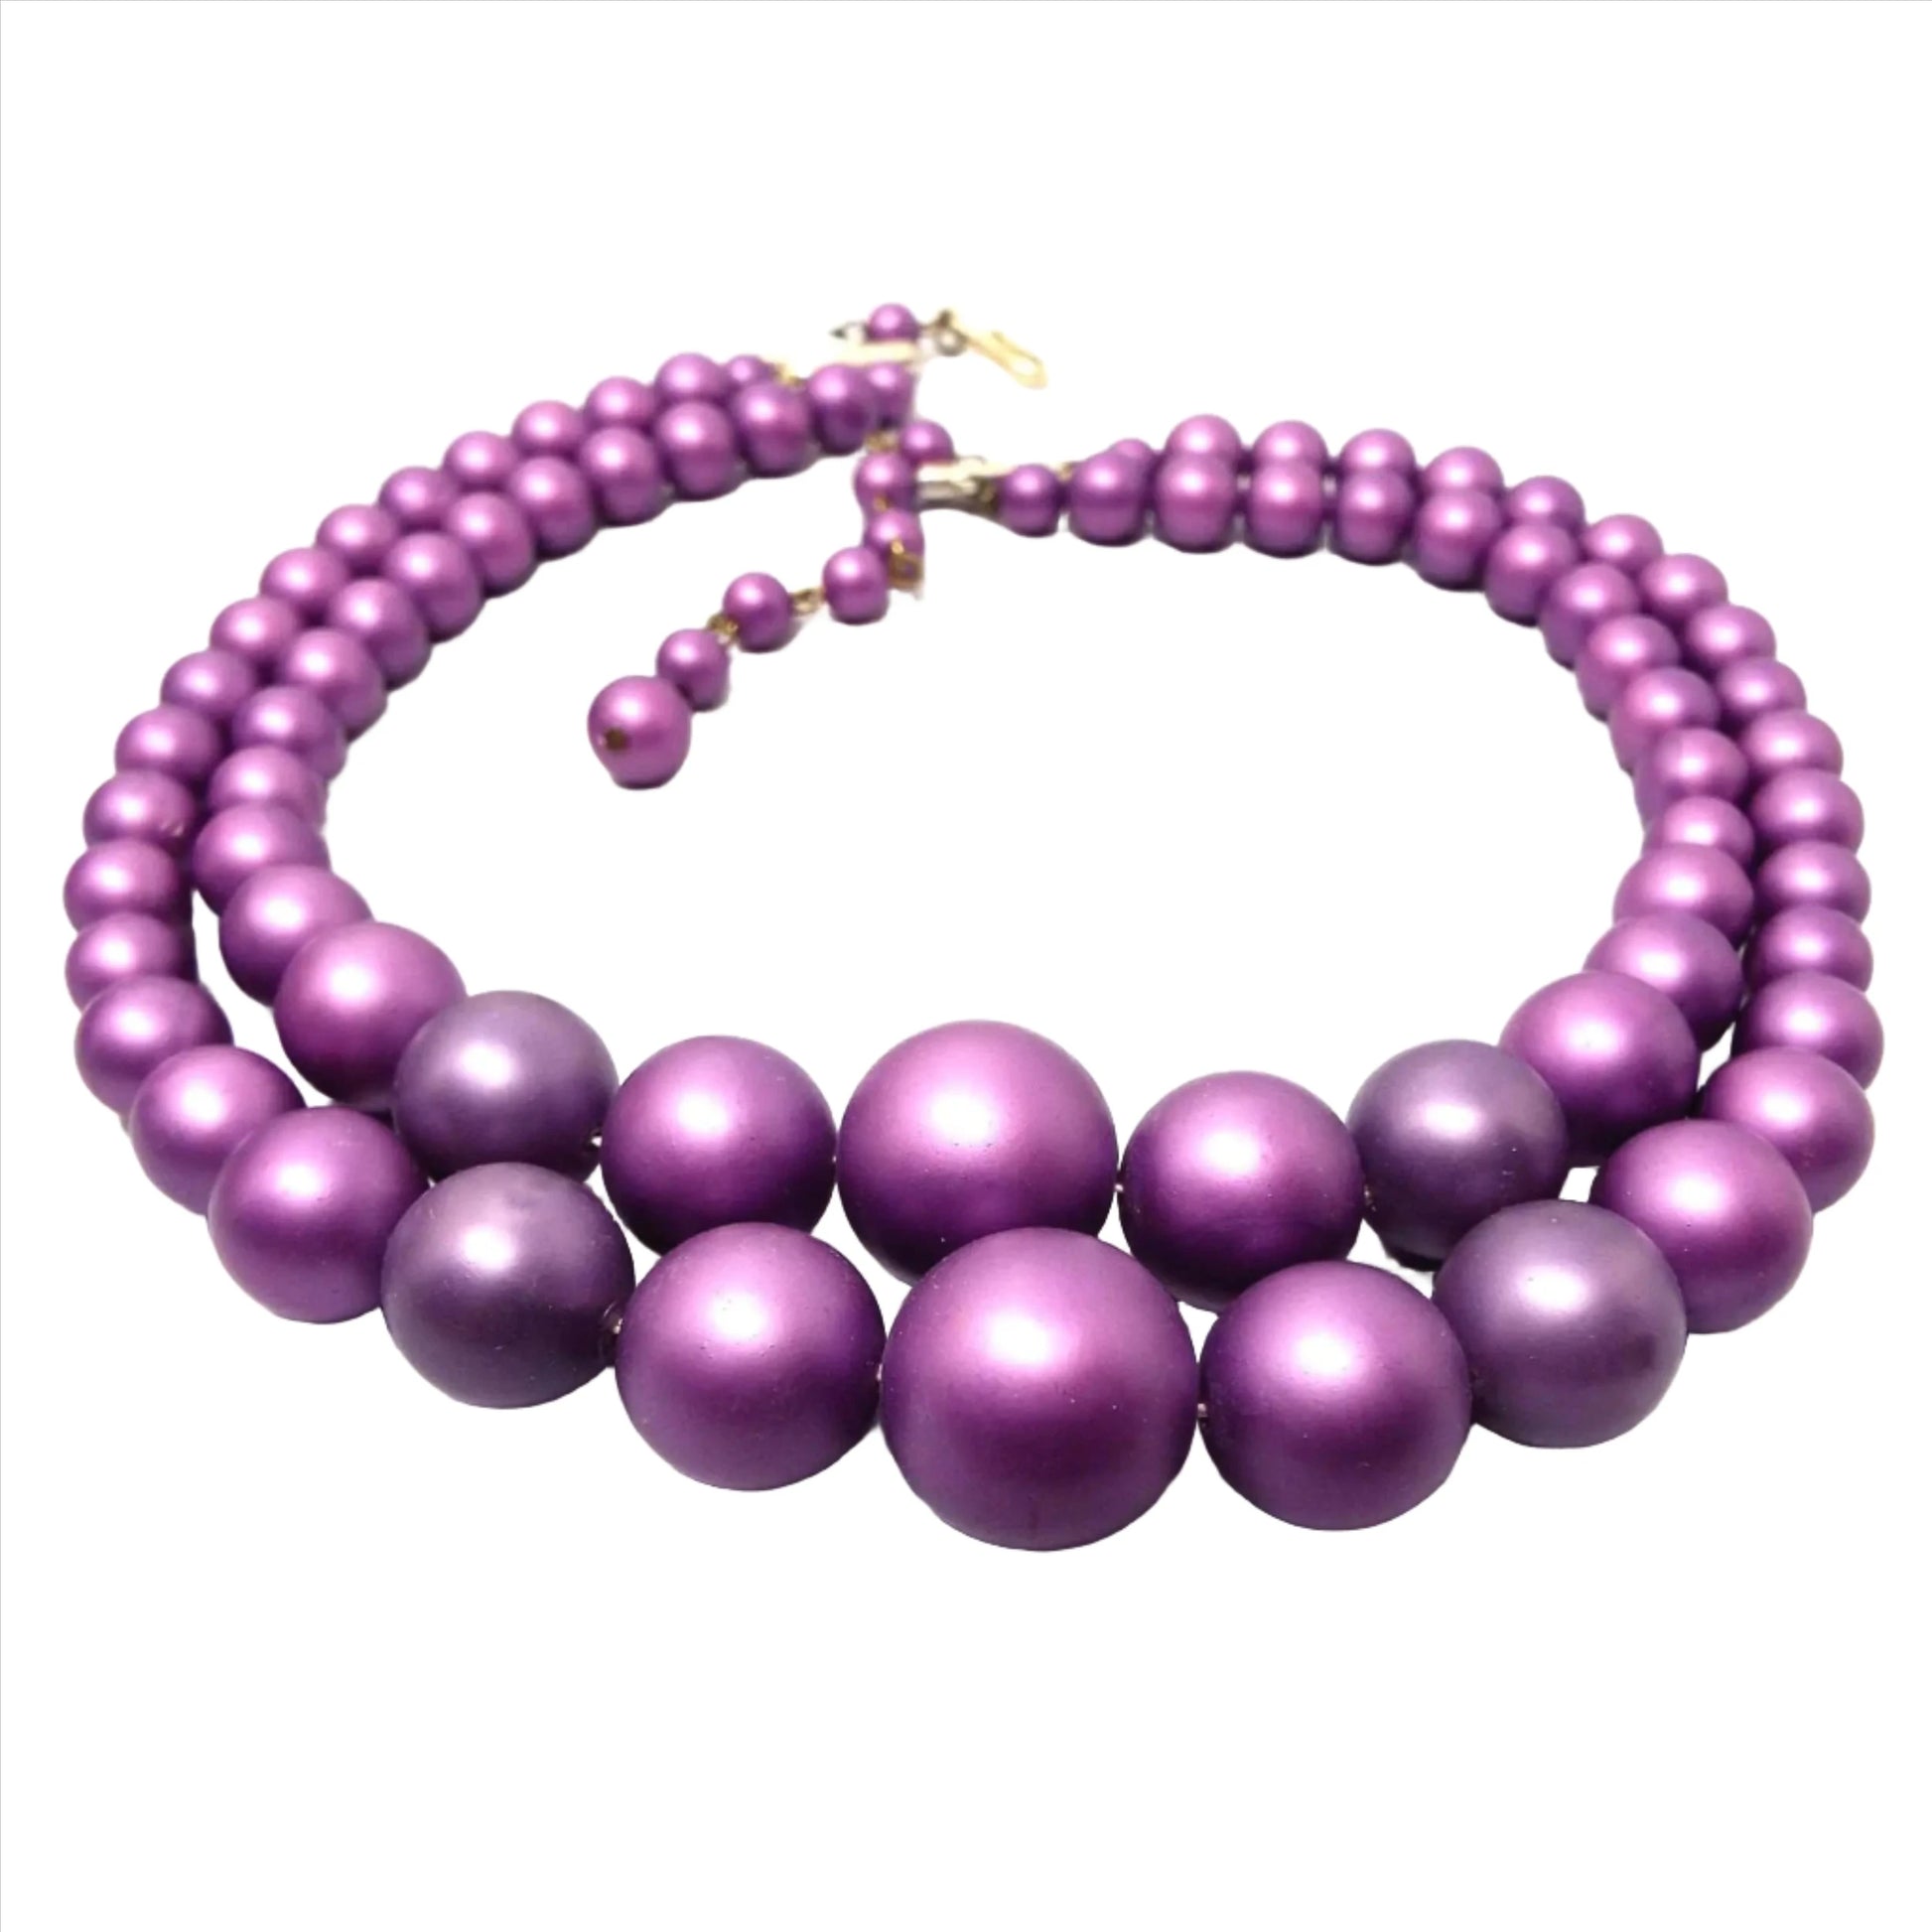 Angled view of the Mid Century vintage Japanese multi strand necklace. It is beaded with round matte shimmery beads in shades of bright purple. There is a hook clasp at the end.